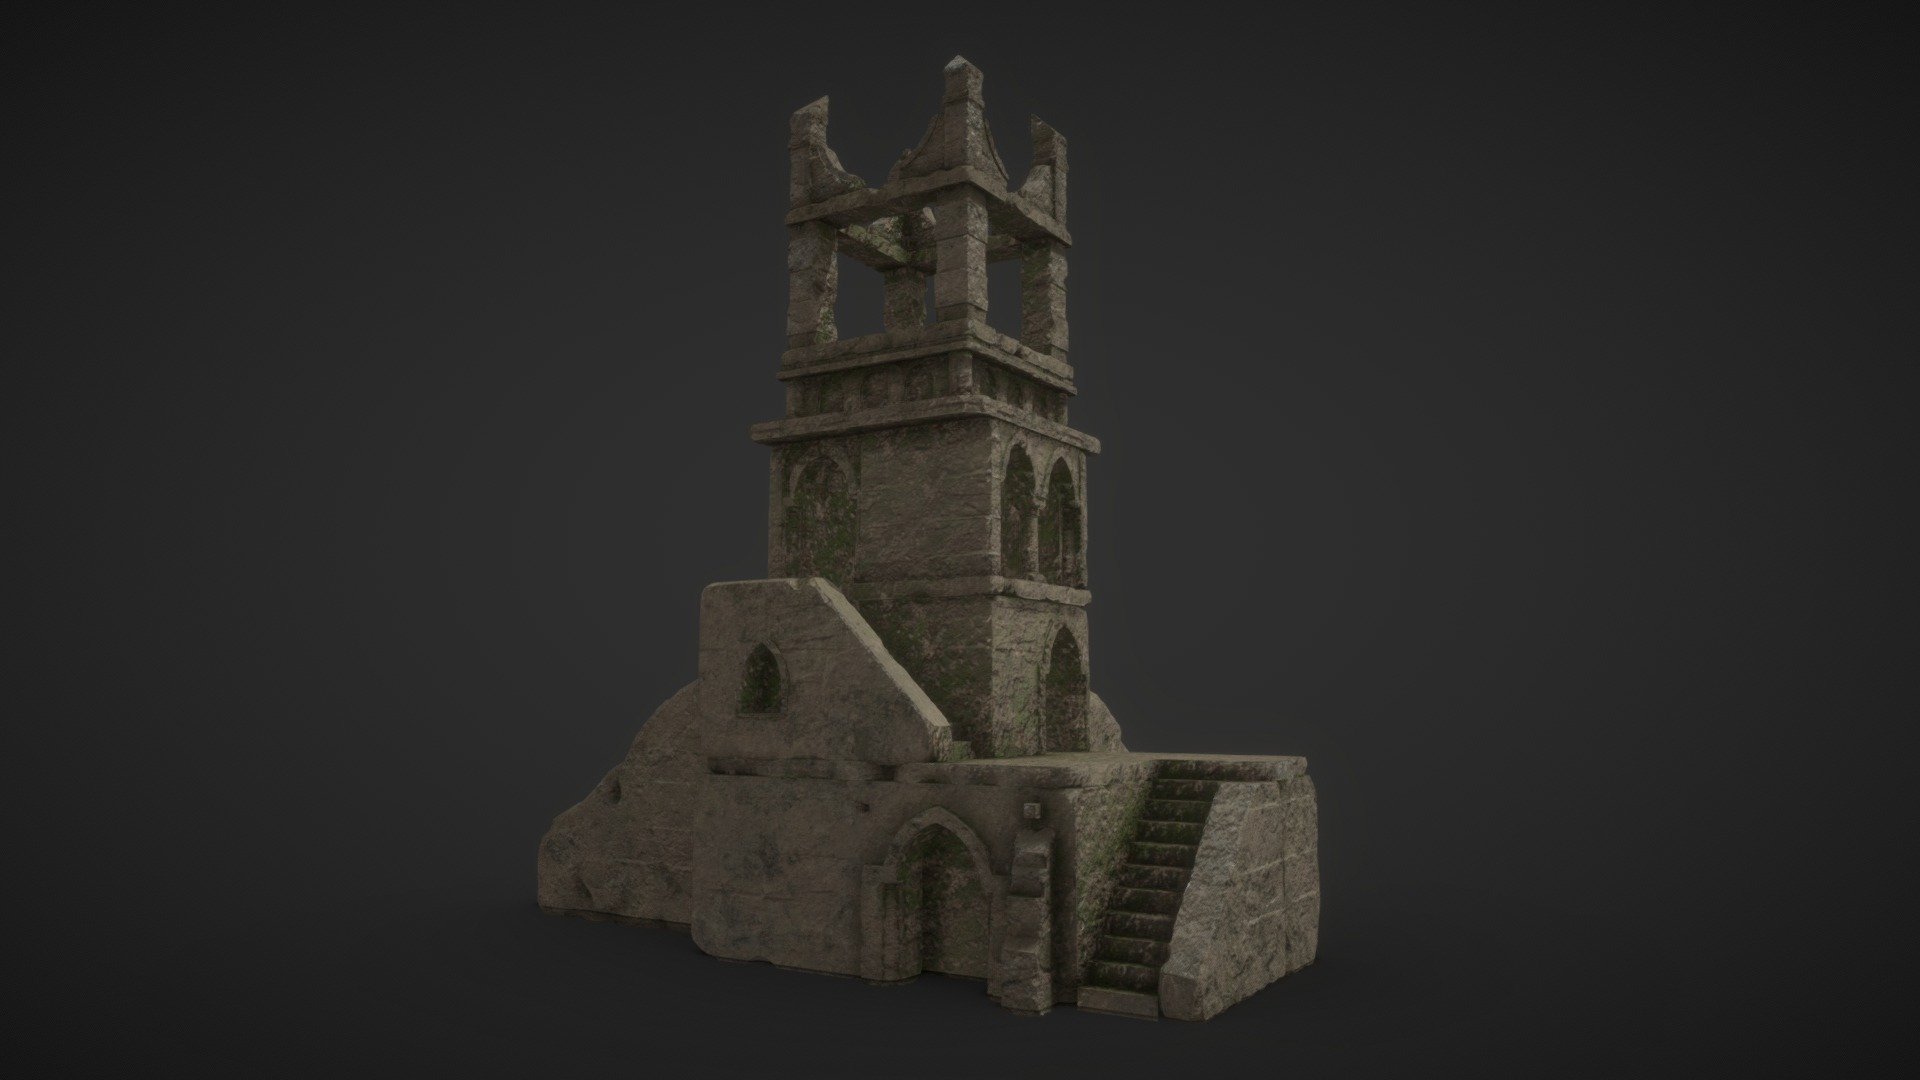 https://www.artstation.com/artwork/qeKdyn Complete Scene Build is available for Demo !!!

A watchtower or watch tower is a type of fortification used in many parts of the world. It differs from a regular tower in that its primary use is military and from a turret in that it is usually a freestanding structure. Its main purpose is to provide a high, safe place from which a sentinel or guard may observe the surrounding area. In some cases, non-military towers, such as religious towers, may also be used as watchtowers 3d model